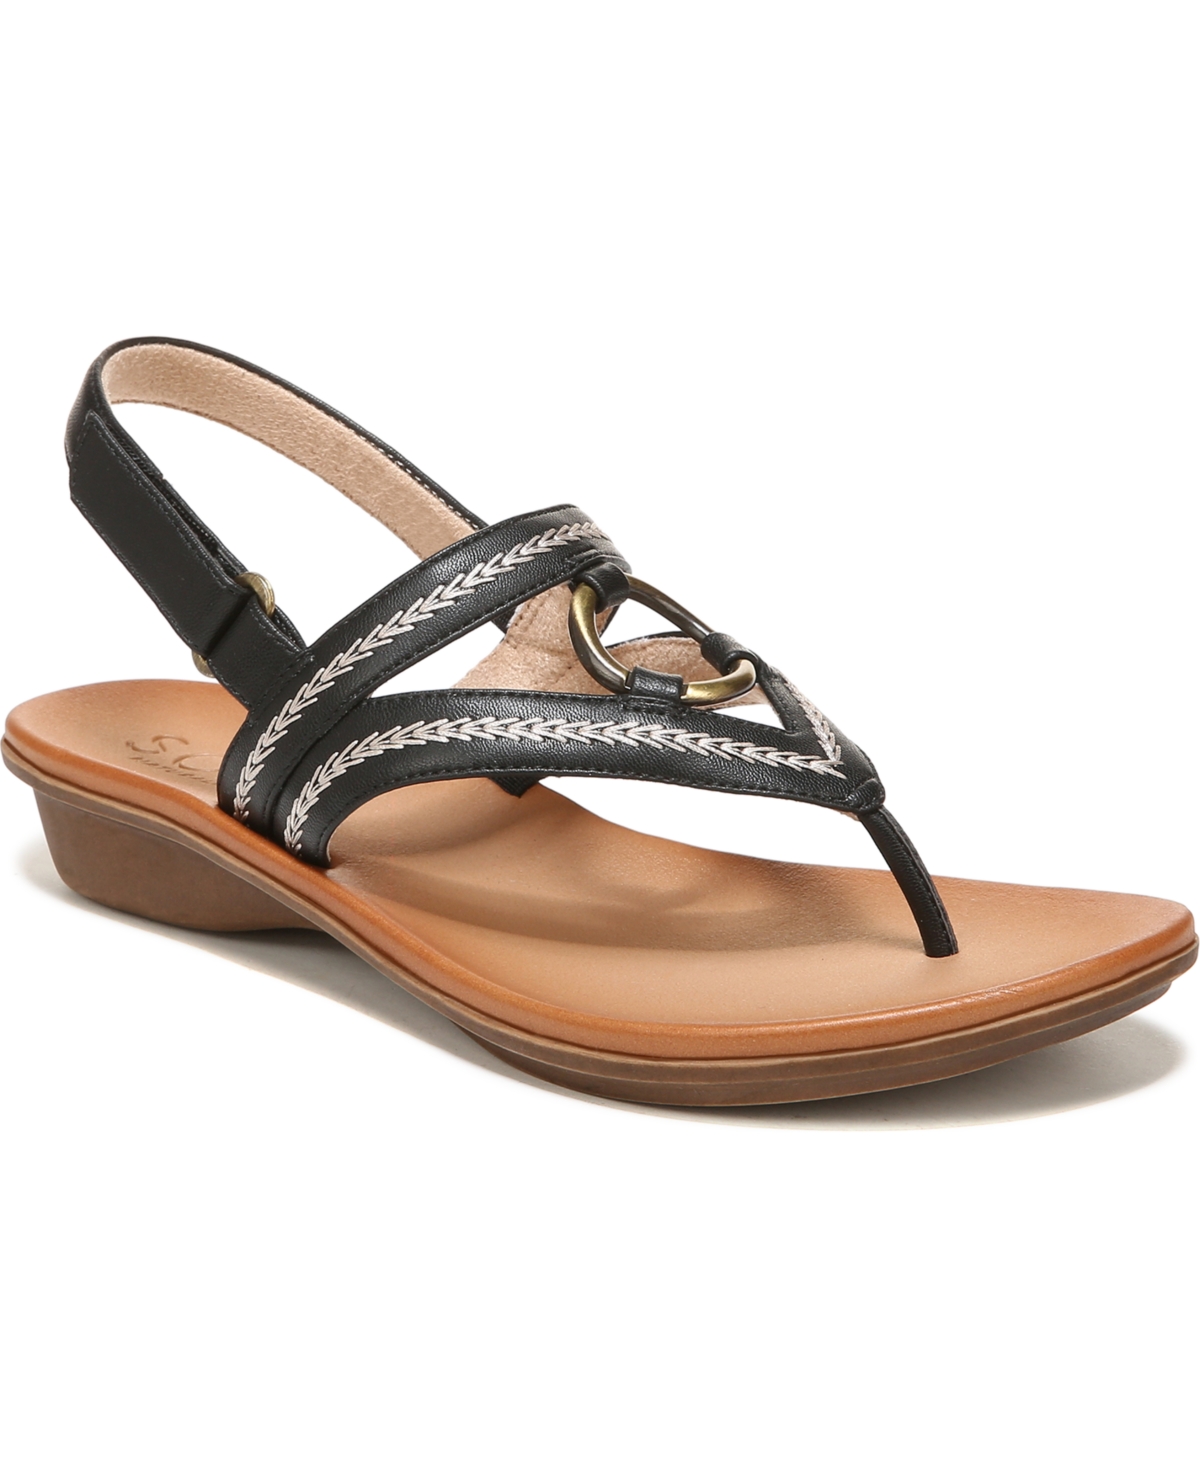 Sunny Flat Sandals - Toffee Smooth Faux Leather